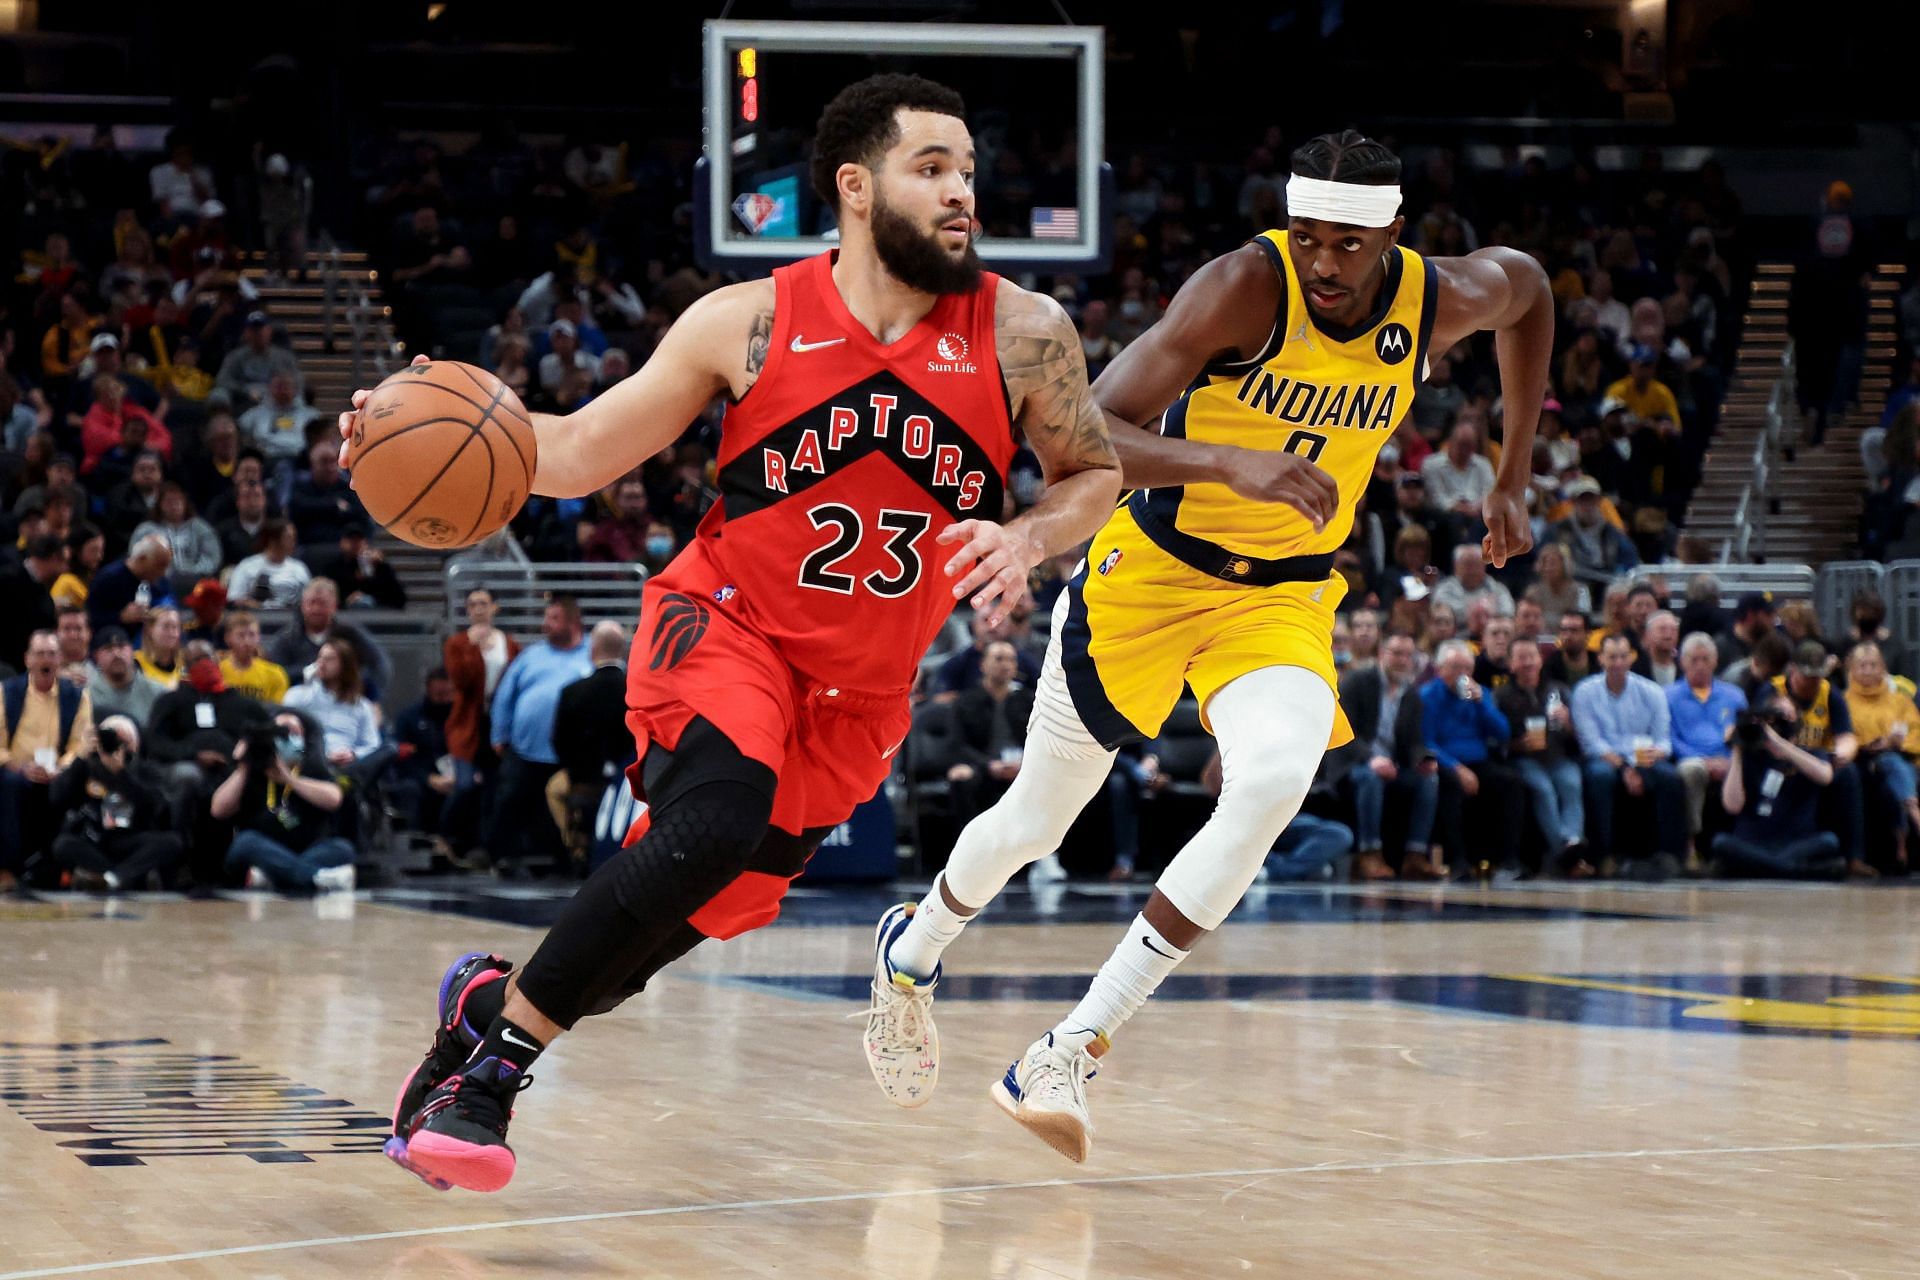 The Toronto Raptors are coming off a 91-98 loss against the Memphis Grizzlies